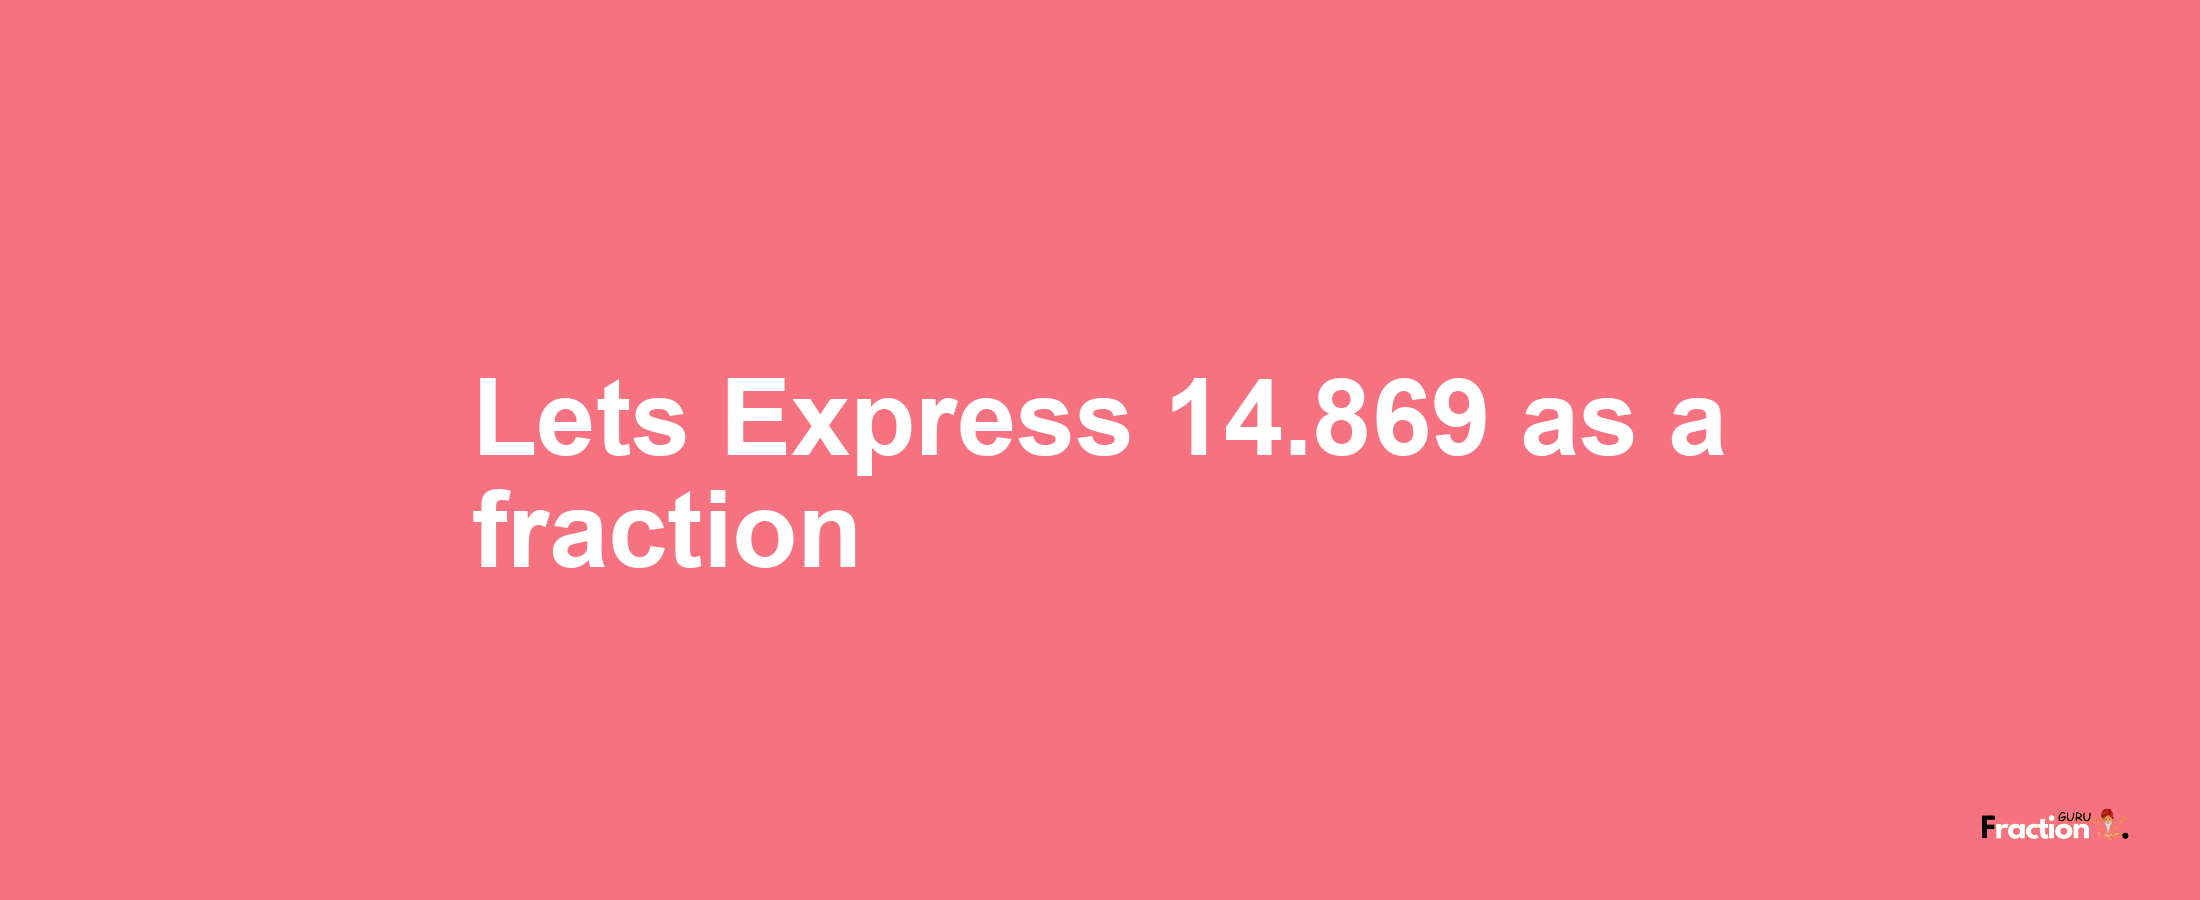 Lets Express 14.869 as afraction